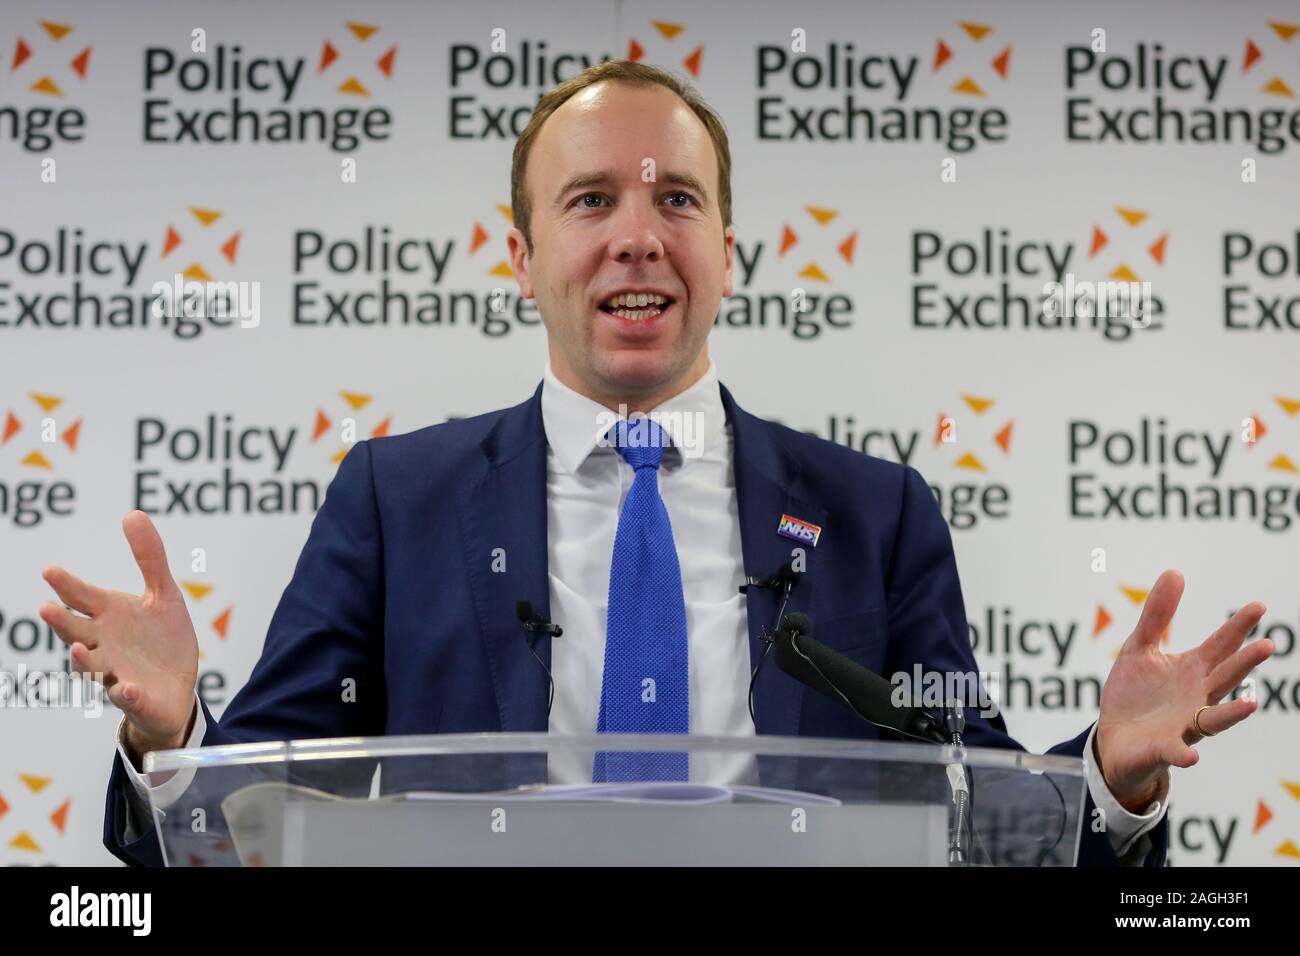 Secretary of State for Health and Social Care, Matt Hancock speaks during the Policy Exchange outlining Tory plans on the National Health Service, following the 2019 General Election in which the Conservative Party won a majority.Matt Hancock announced extra government funding for the National Health Service (NHS) and recruitment for new staff and infrastructure. Stock Photo